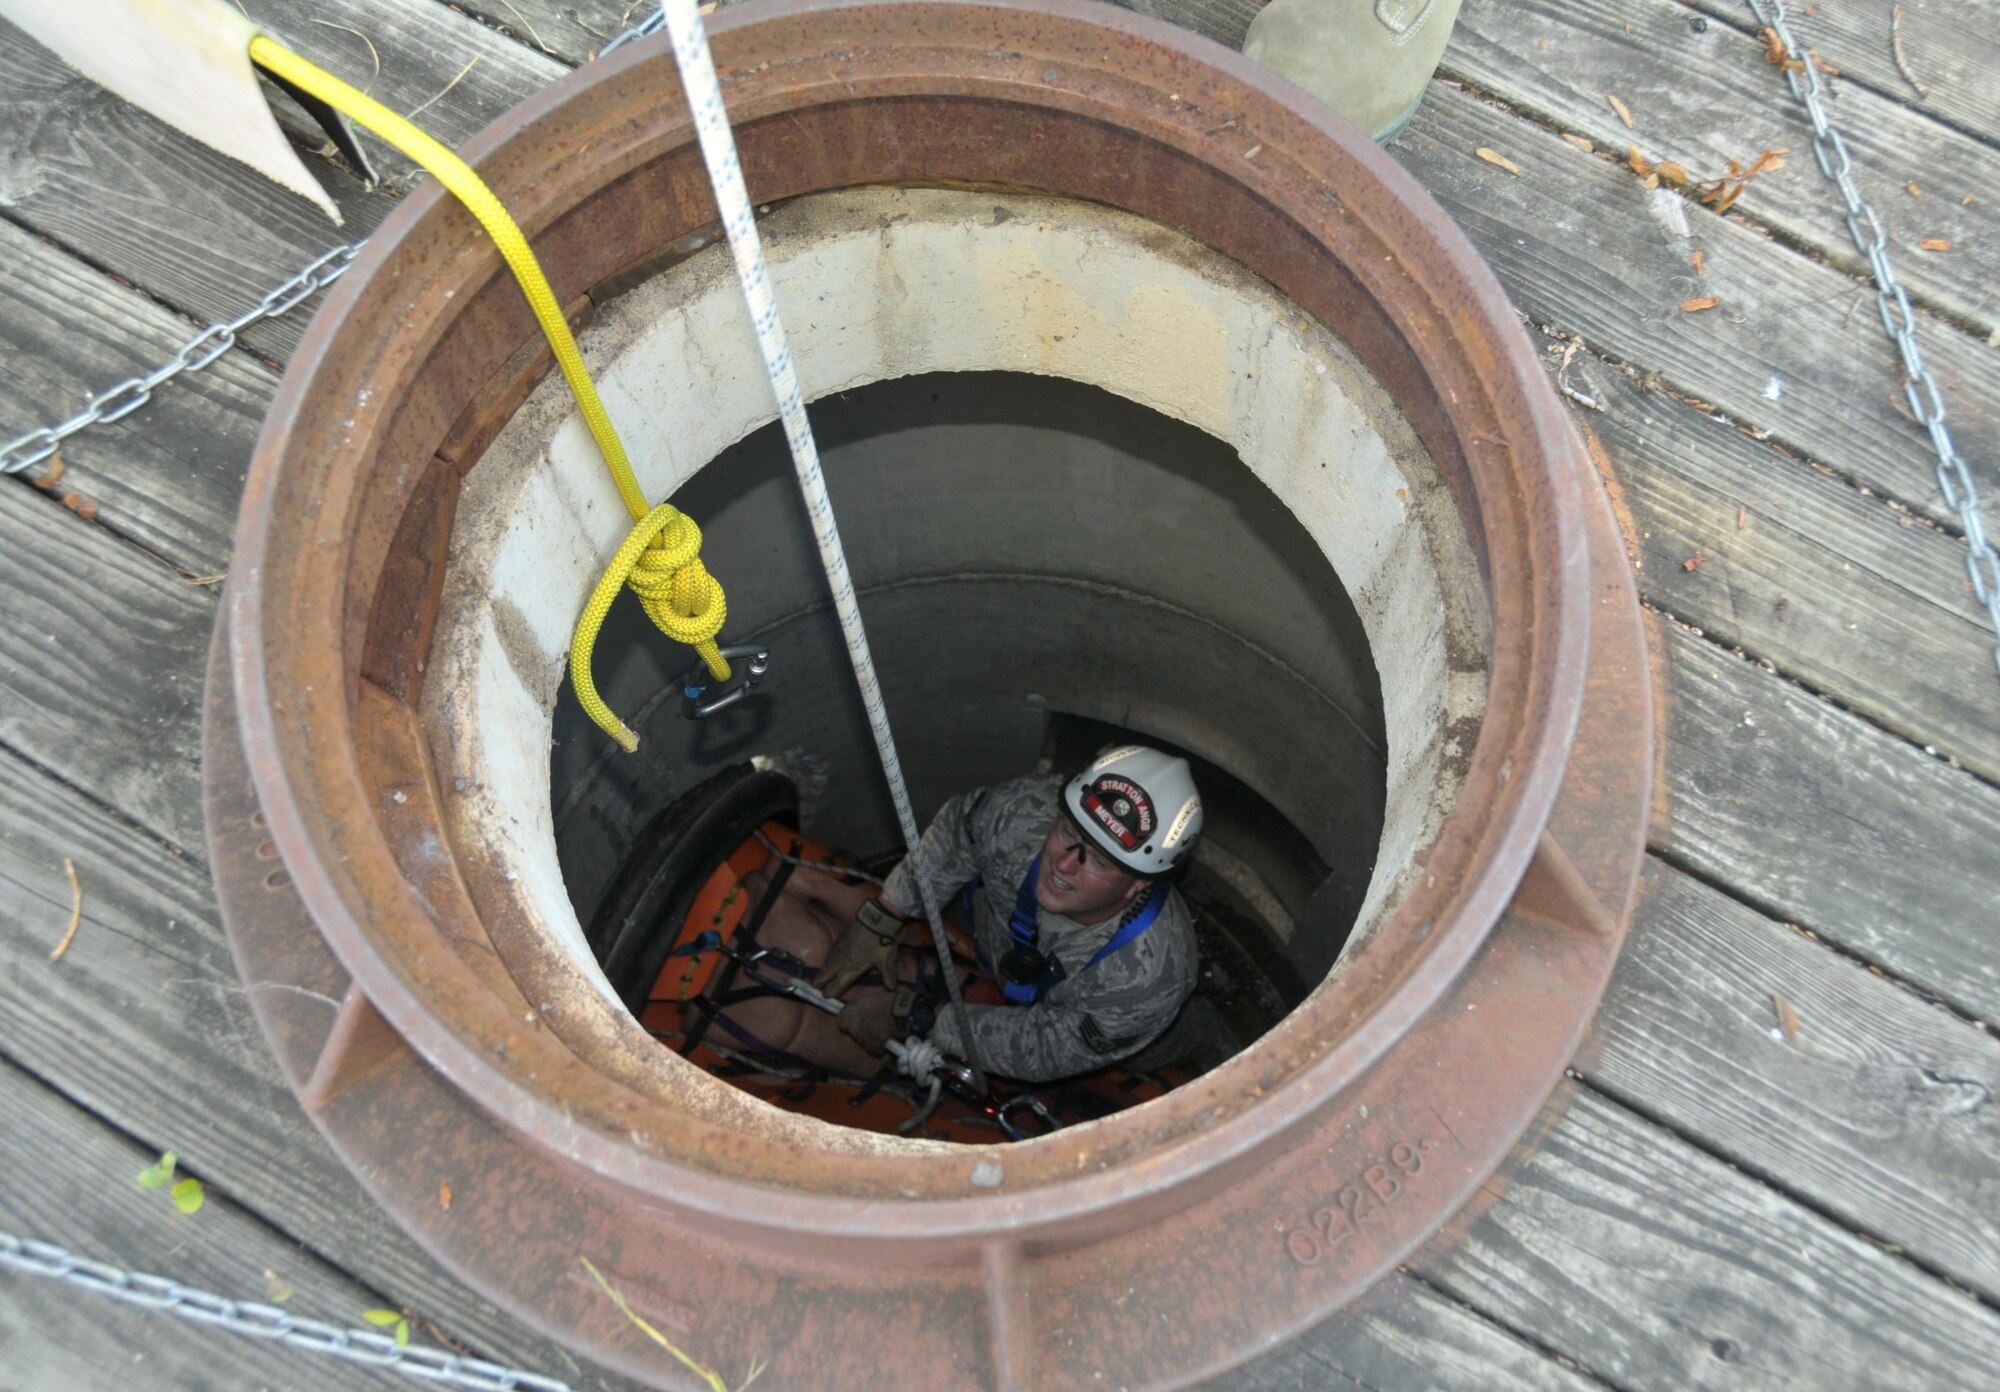 Staff Sgt. Christopher Meyer participates in the 109th Fire Department's search and rescue team's confined space training at Stratton Air National Guard Base, New York, on Sept. 17, 2015. The 12-person search and rescue team trains monthly on various rescue techniques. (U.S. Air National Guard photo by Tech. Sgt. Catharine Schmidt/Released)